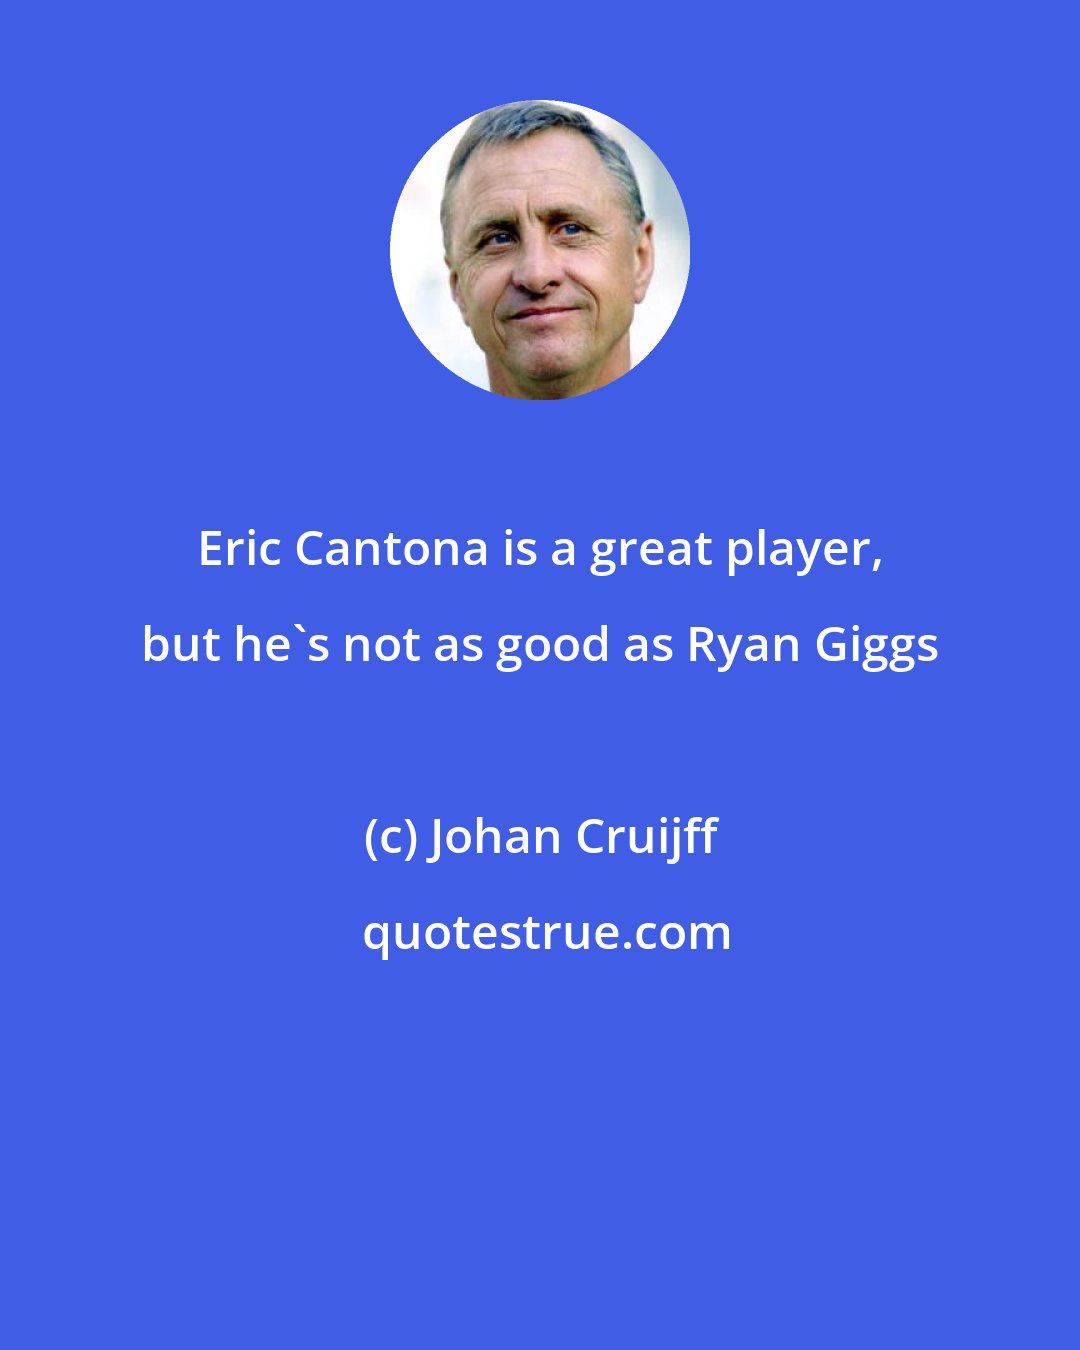 Johan Cruijff: Eric Cantona is a great player, but he's not as good as Ryan Giggs